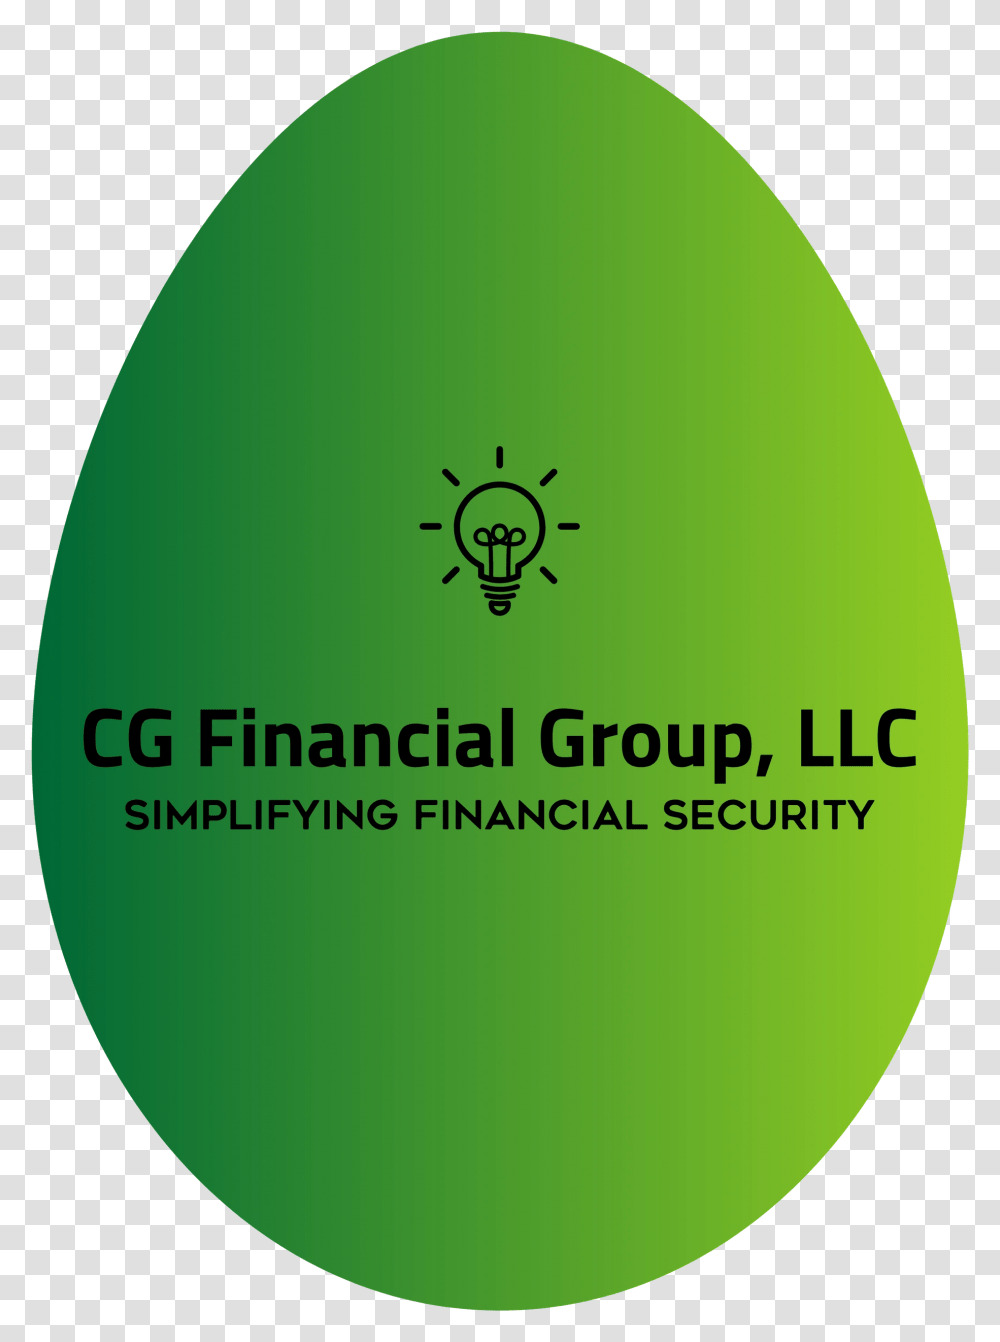 About The Green Egg Logo Cg Financial Group Llc Circle, Plant, Food, Fruit, Ball Transparent Png